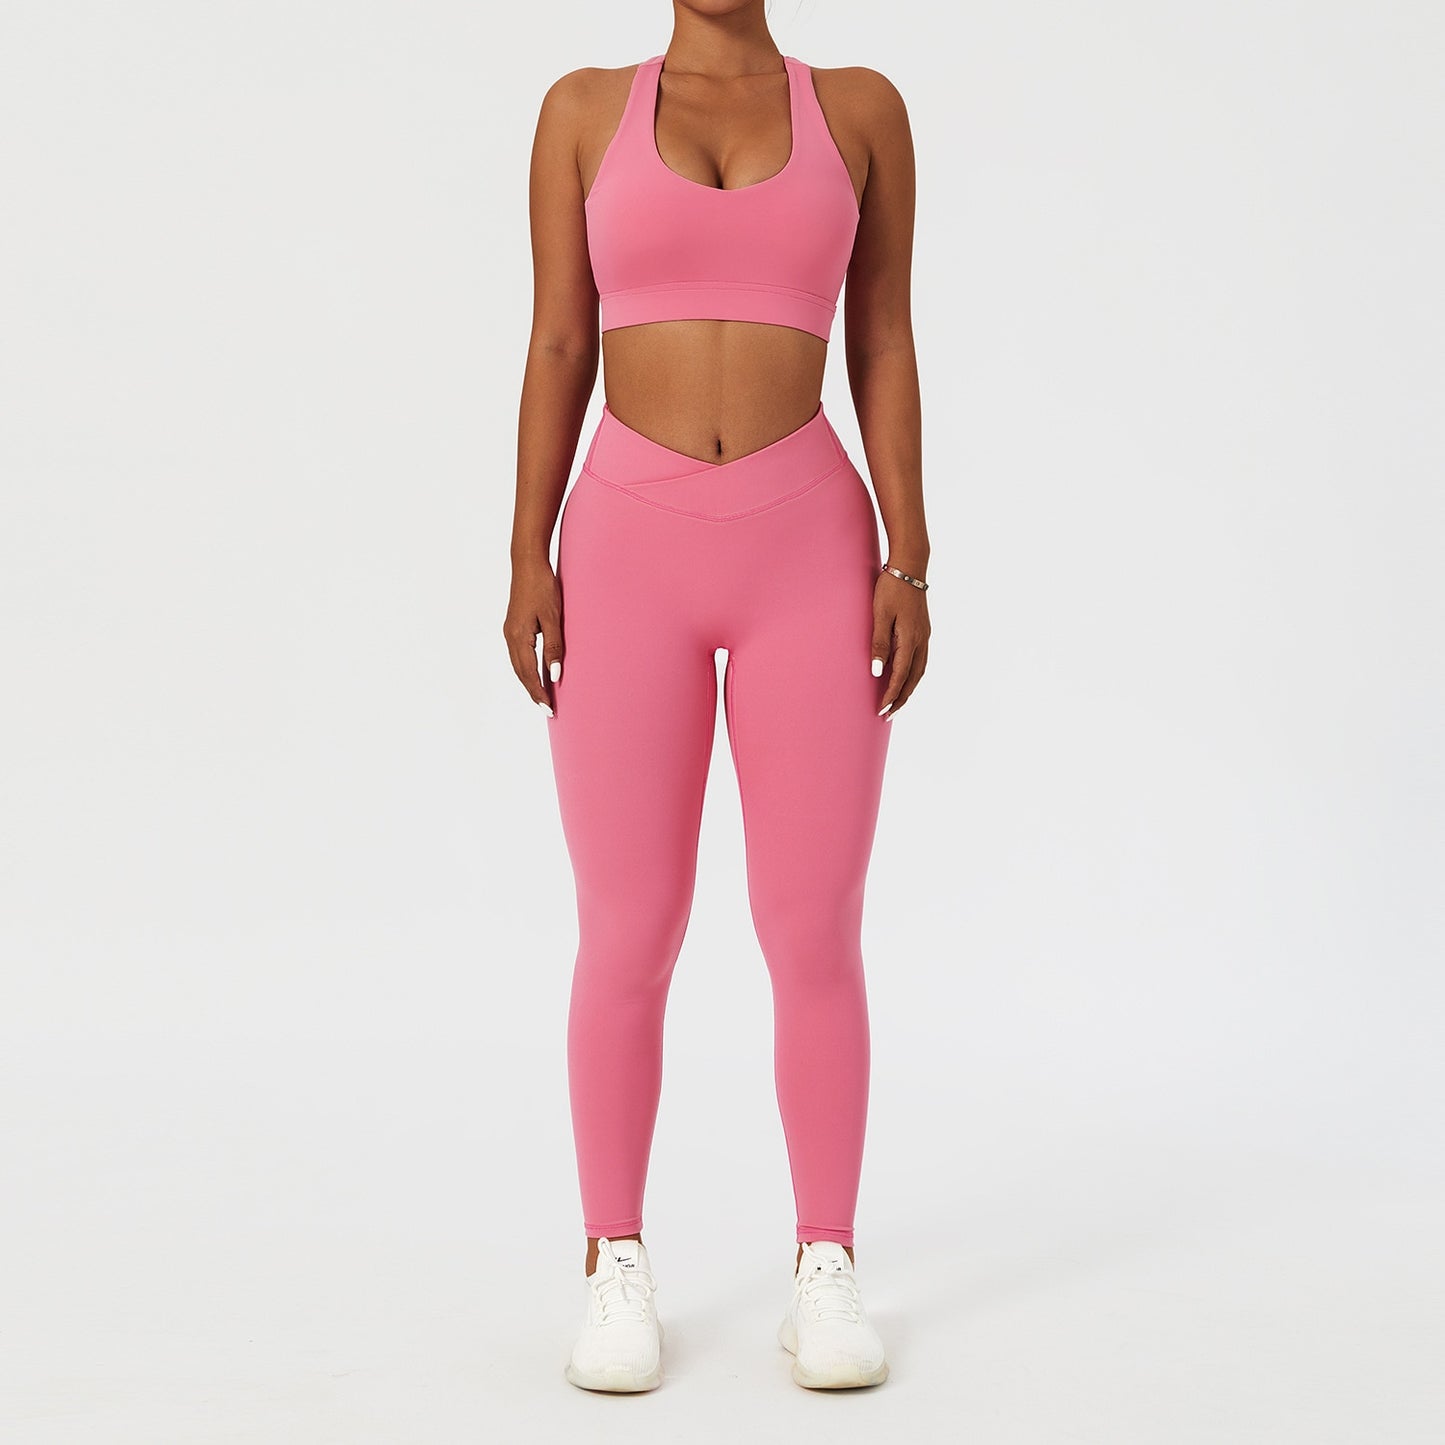 2 Piece Women's Yoga Set Workout Shirts Sport Pants Bra Gym Suits Fitness Shorts Crop Top High Waist Running Leggings Sports Sets The Clothing Company Sydney